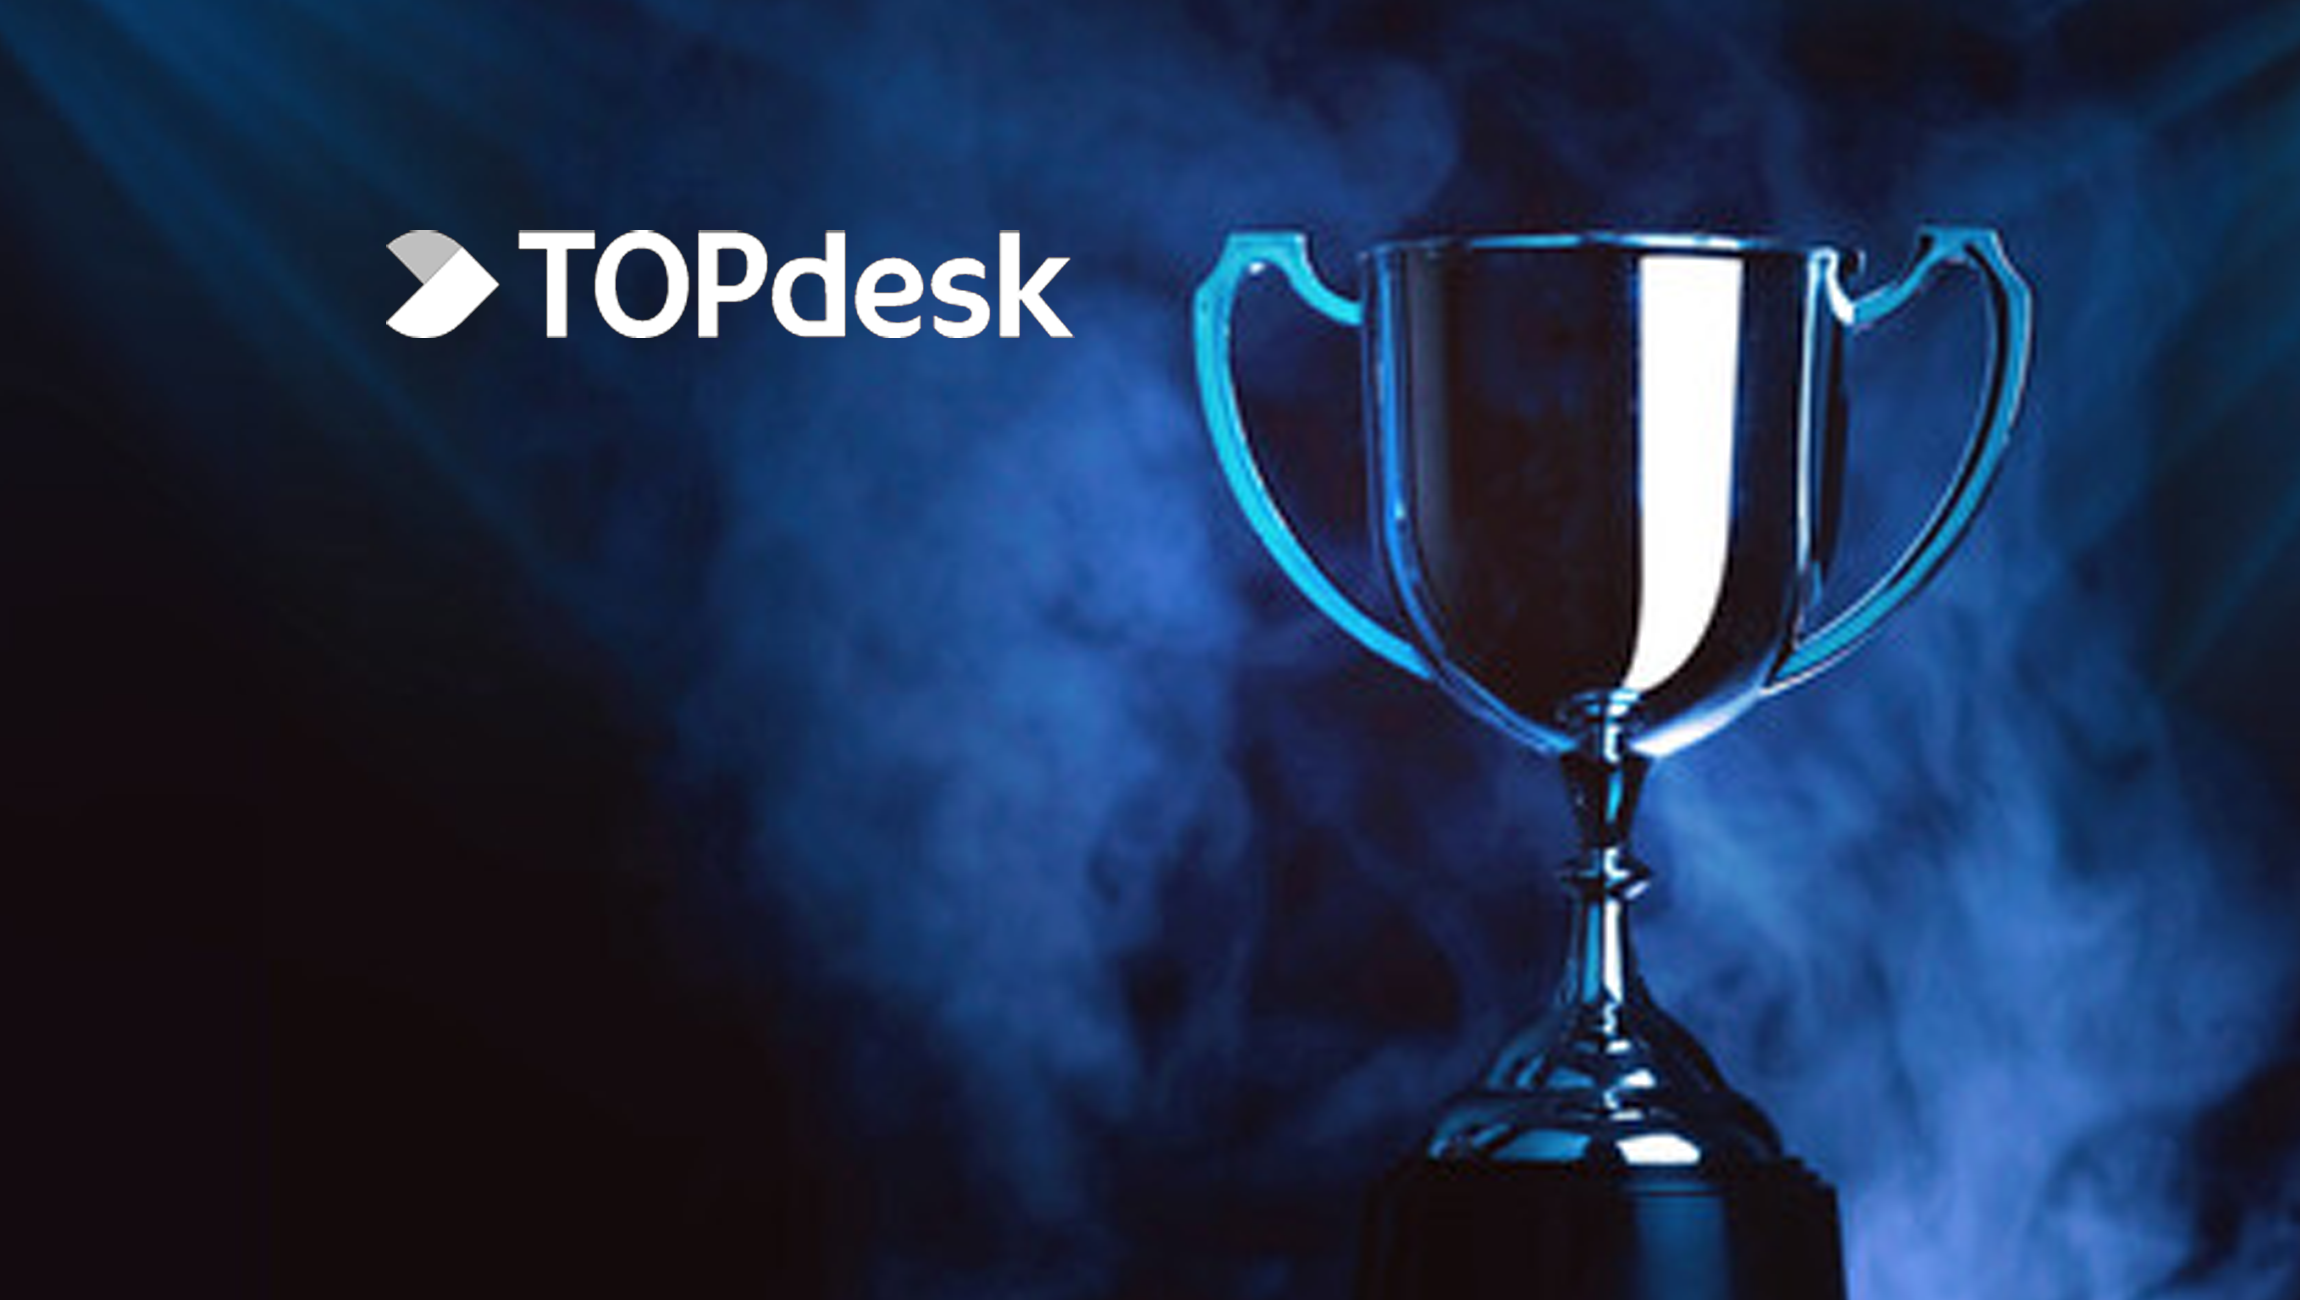 TOPdesk Receives Two TrustRadius Customer "Top Rated" Awards